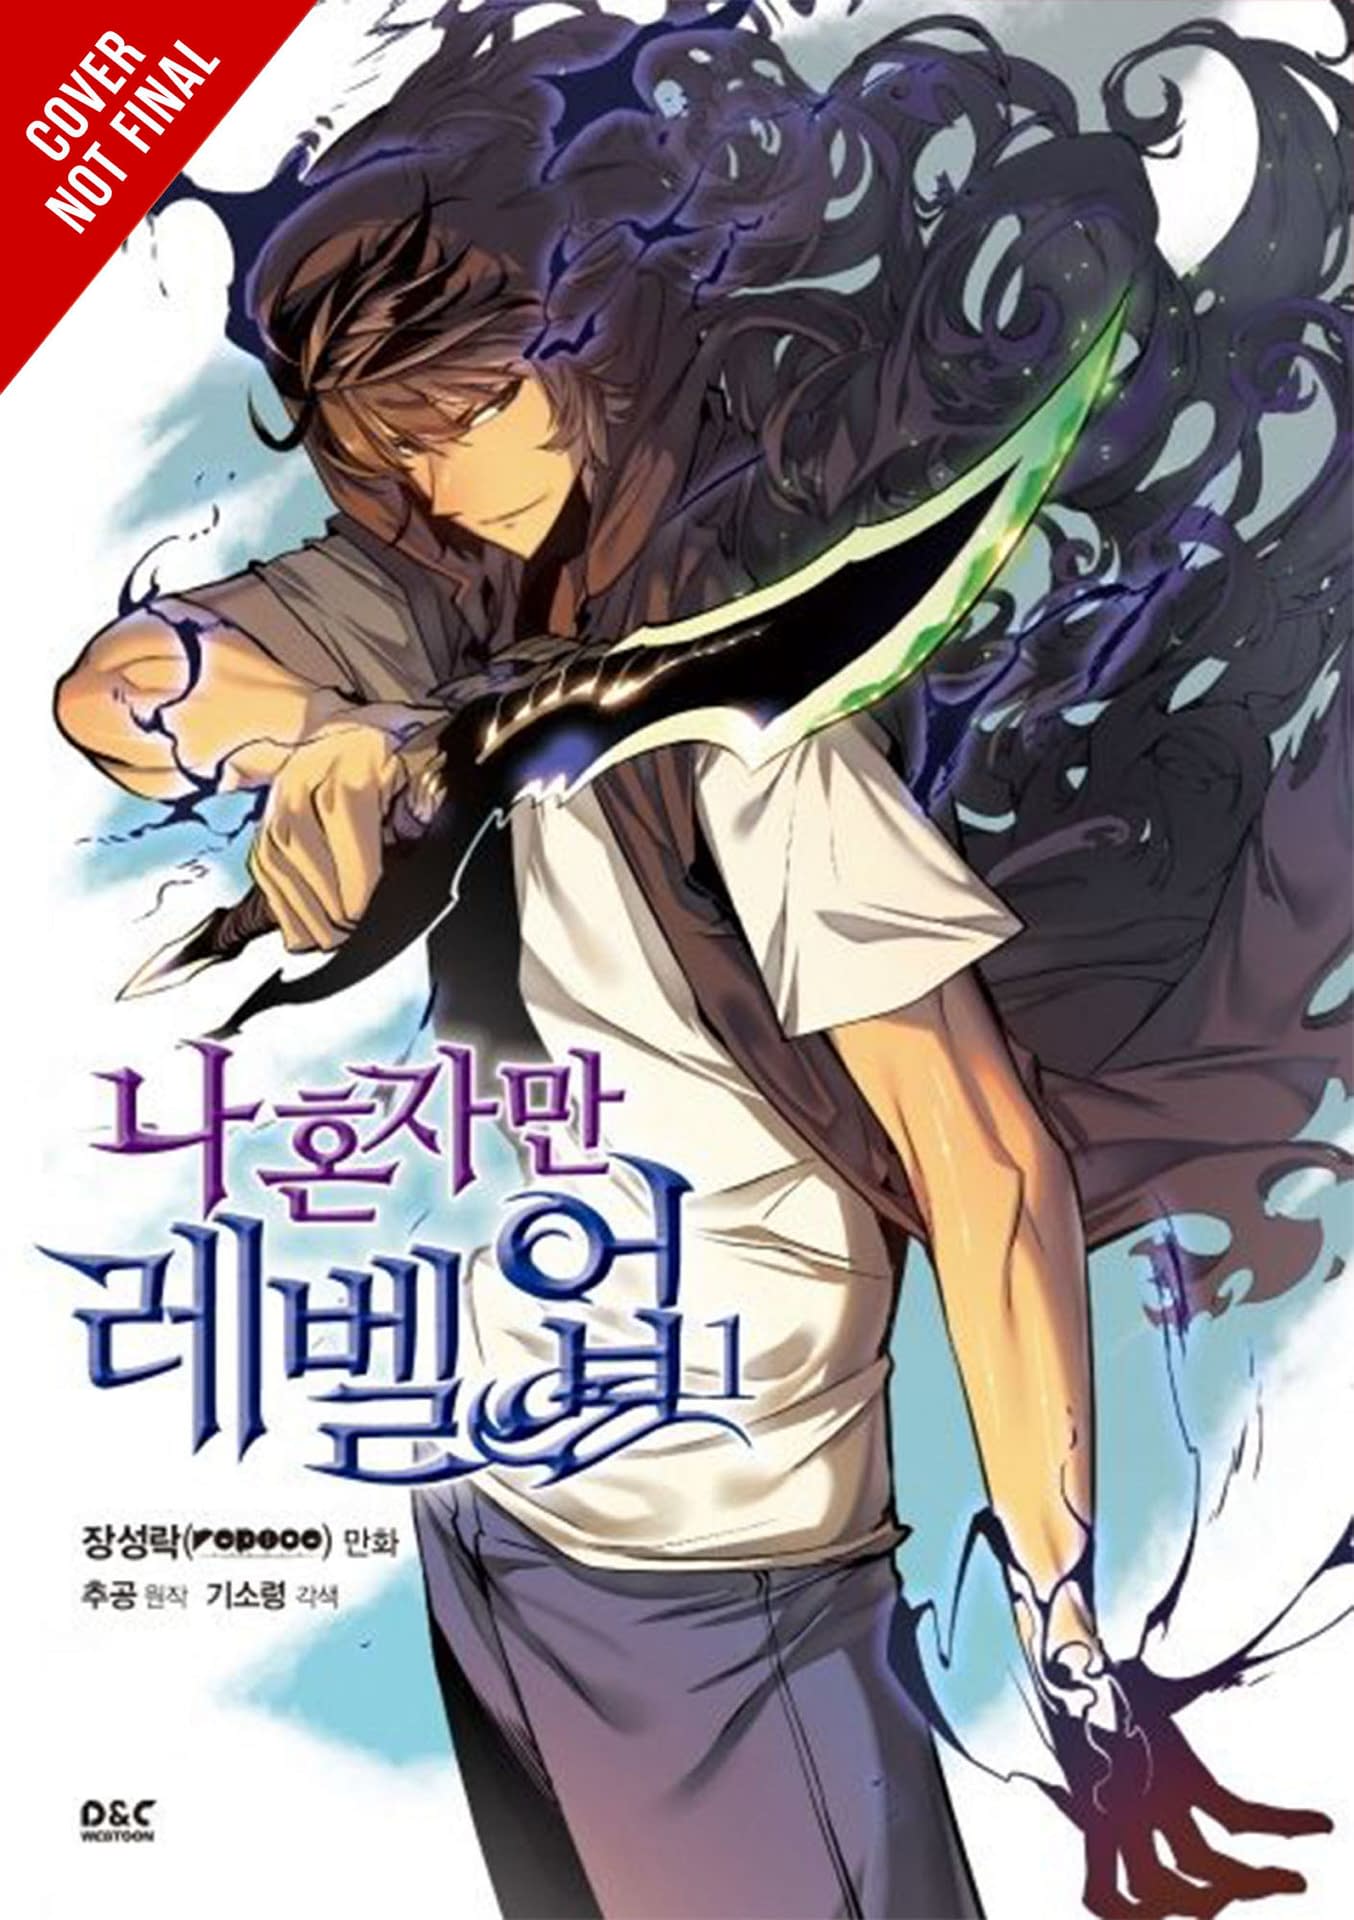 Yen Press - It's the last new release day of 2020! We've saved